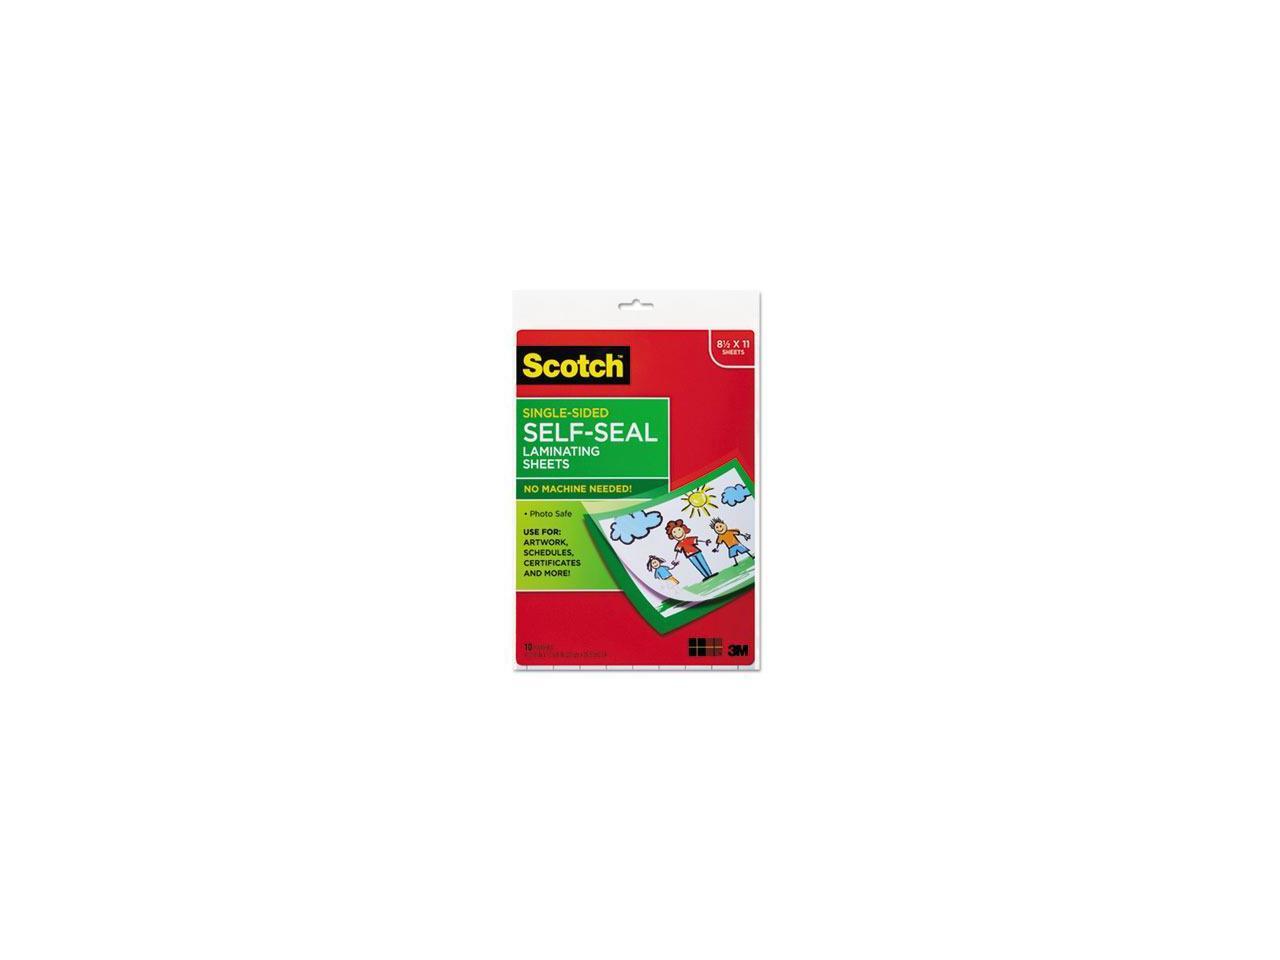 Scotch Self-Seal Laminating Pouches 10pack 2” X 3.5” Pouch 